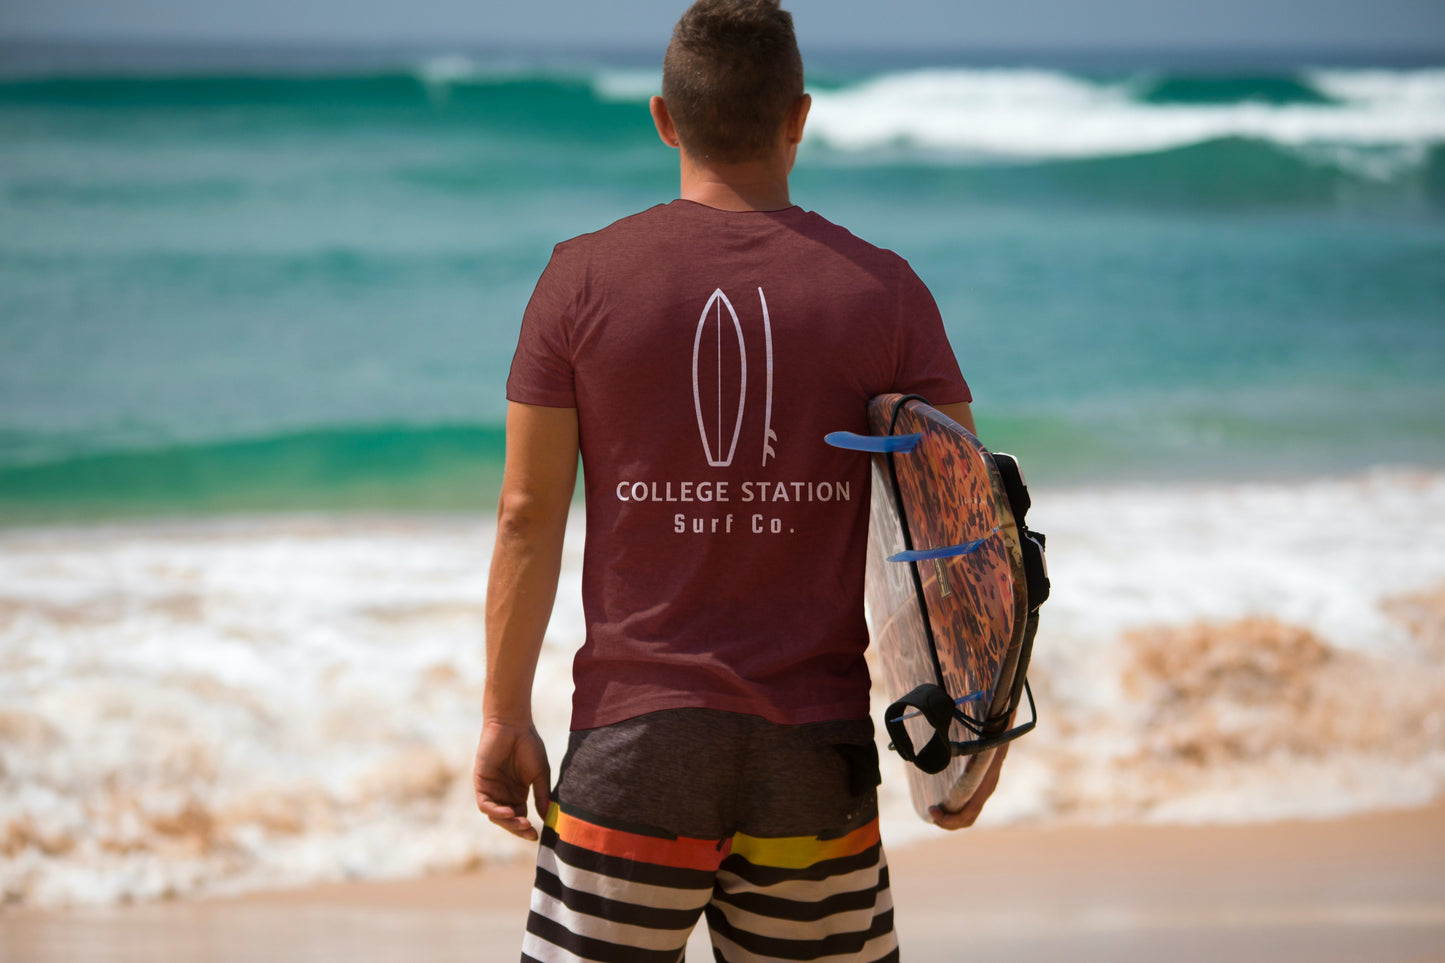 College Station Surf Co. Maroon Surfboard Shirt